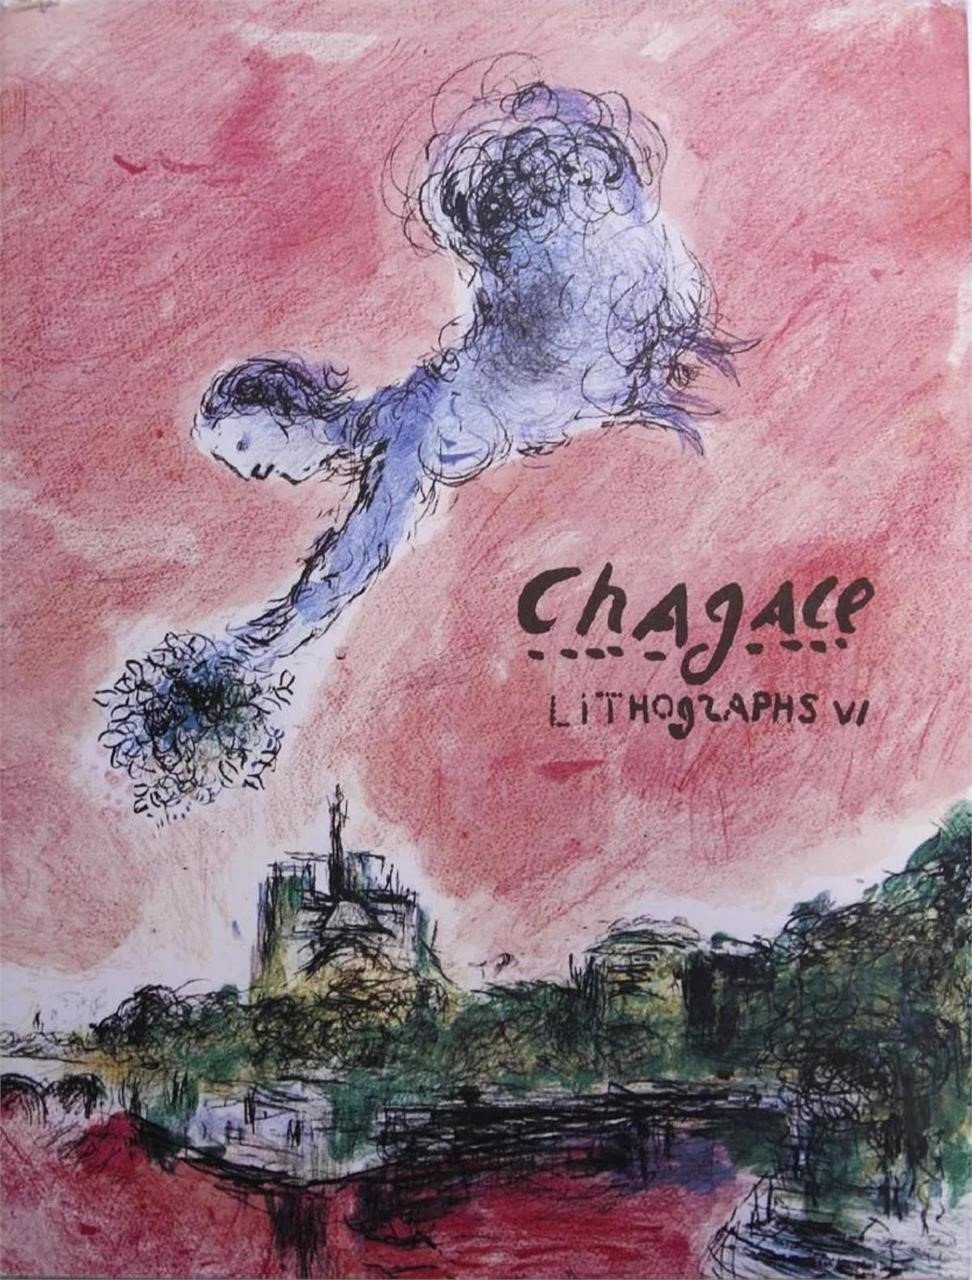 Marc Chagall- Hardcover Book "Lithographs V"